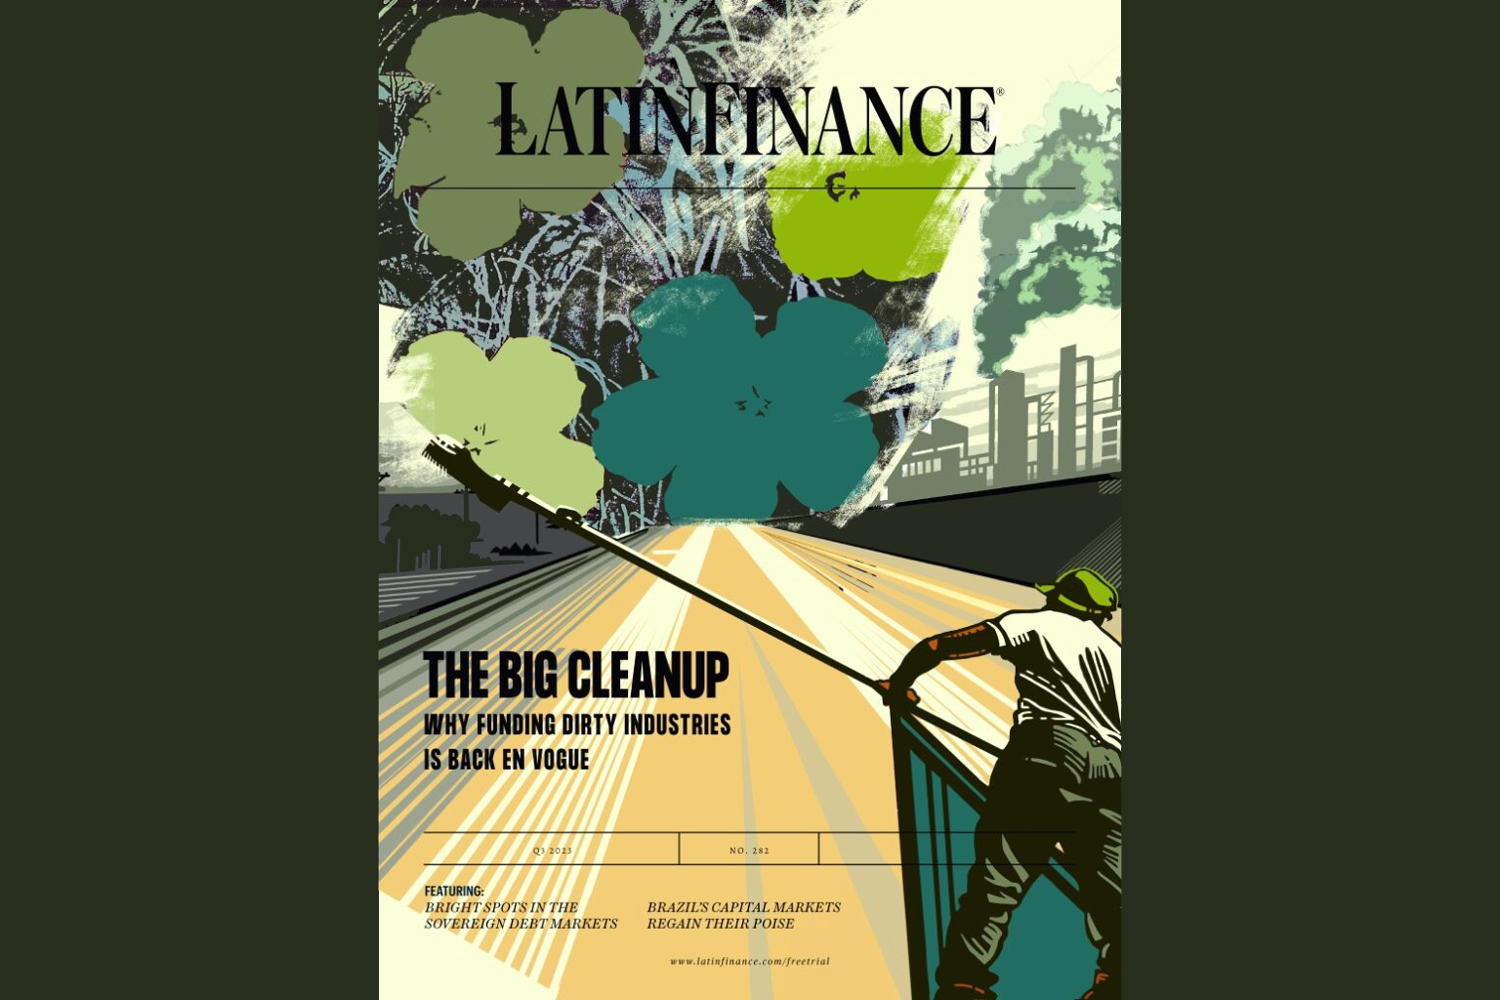 Latin Finance The Big Cleanup